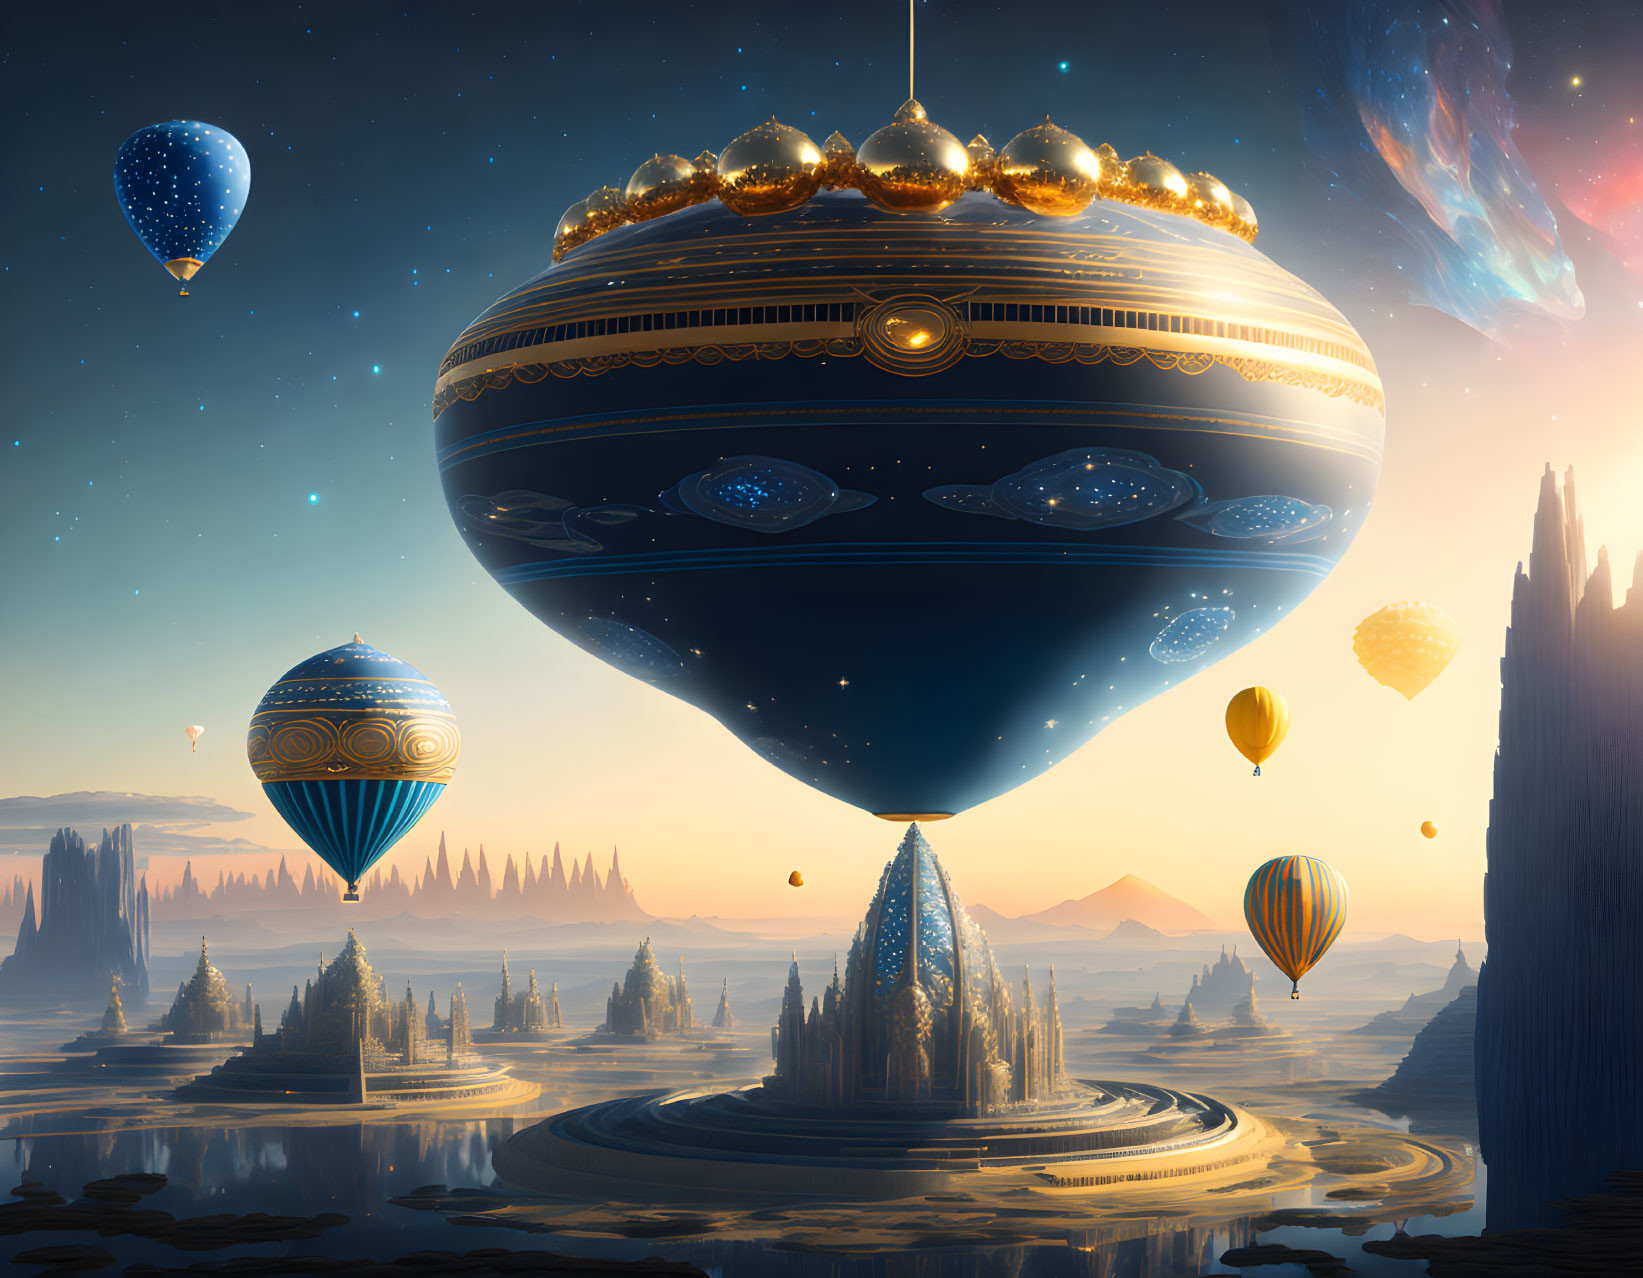 Fantastical landscape with floating cities and airships in twilight sky